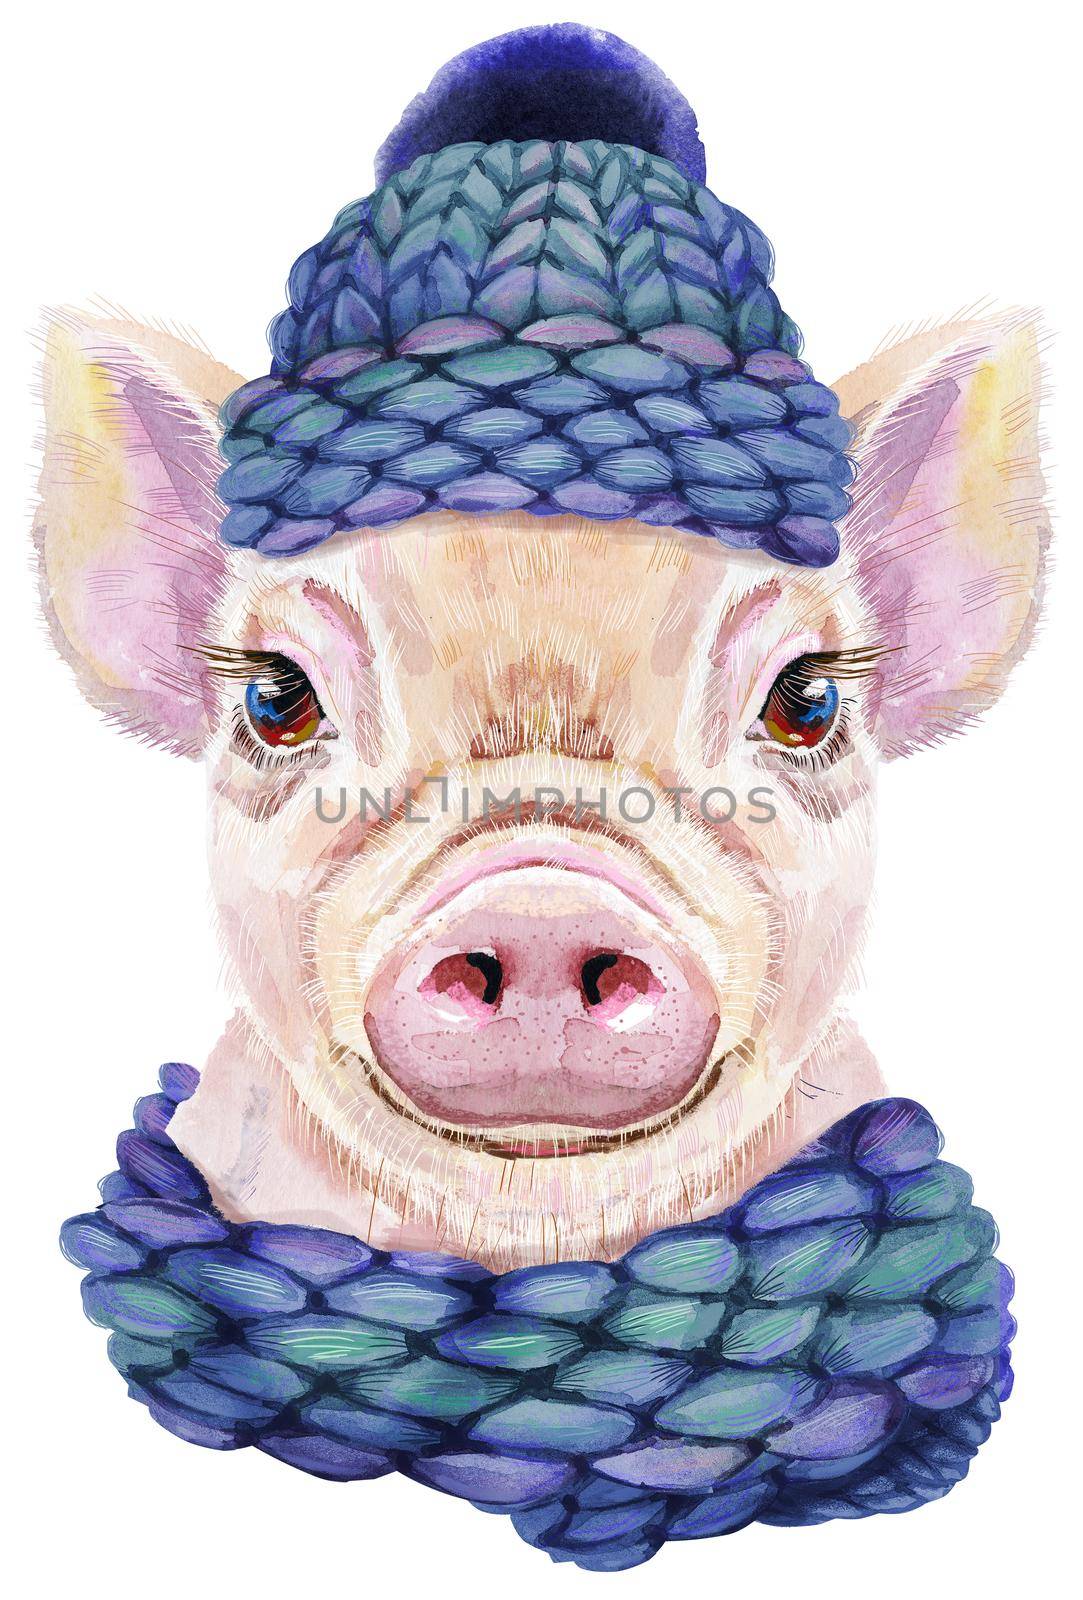 Cute piggy in a knitted blue hat and scarf. Pig for T-shirt graphics. Watercolor pink mini pig illustration